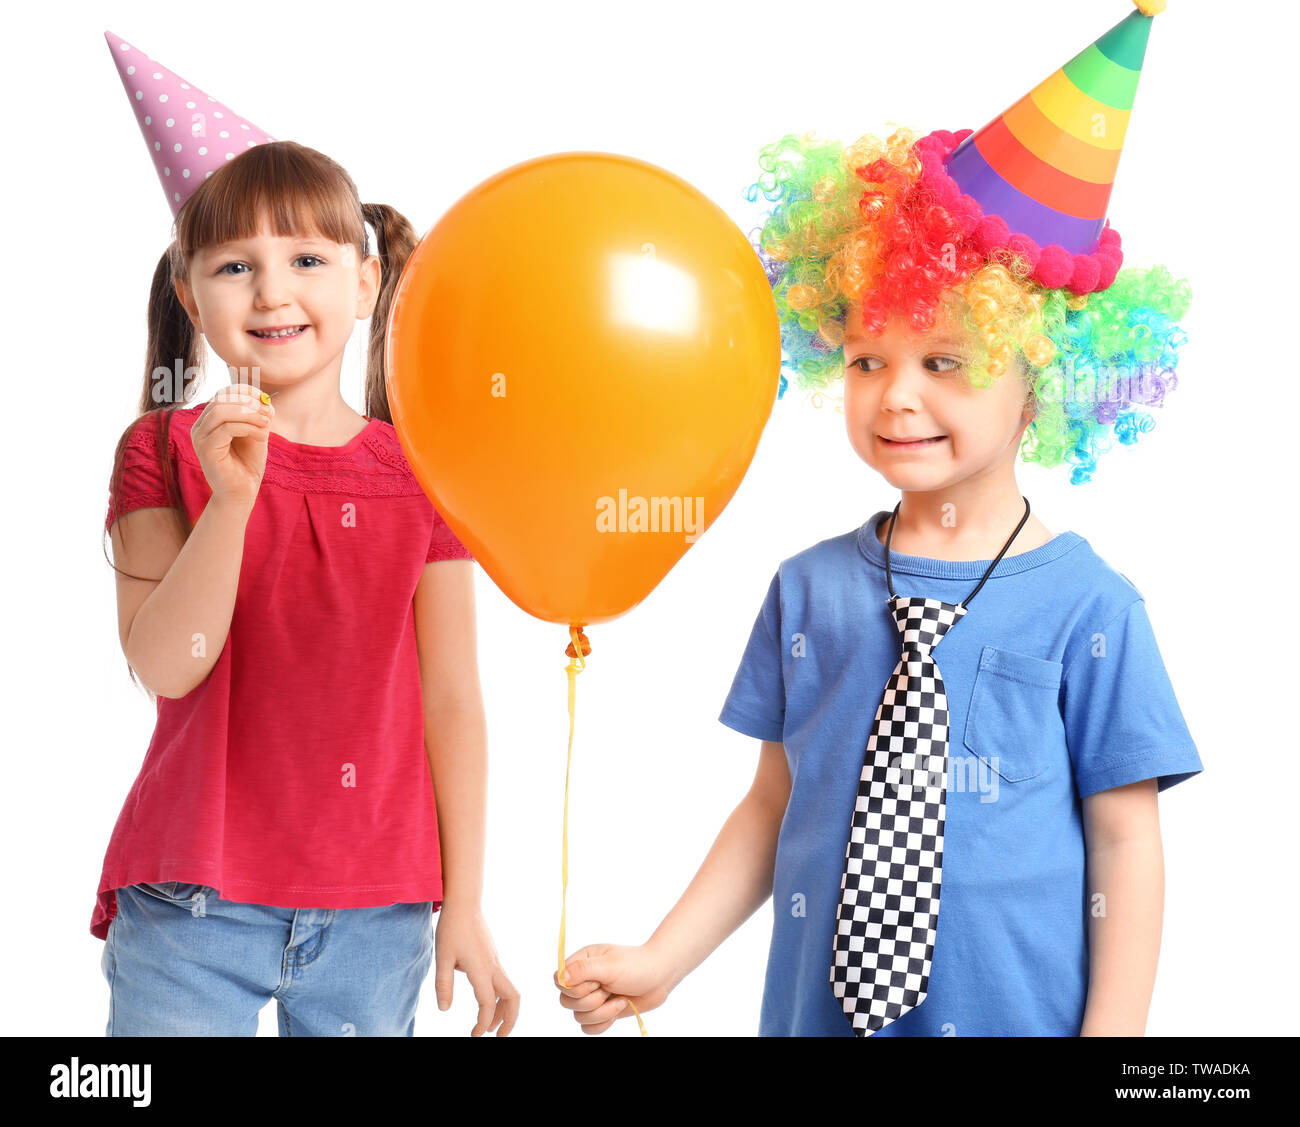 Cute little girl popping brother's balloon with pin on white background. April fool's day celebration Stock Photo